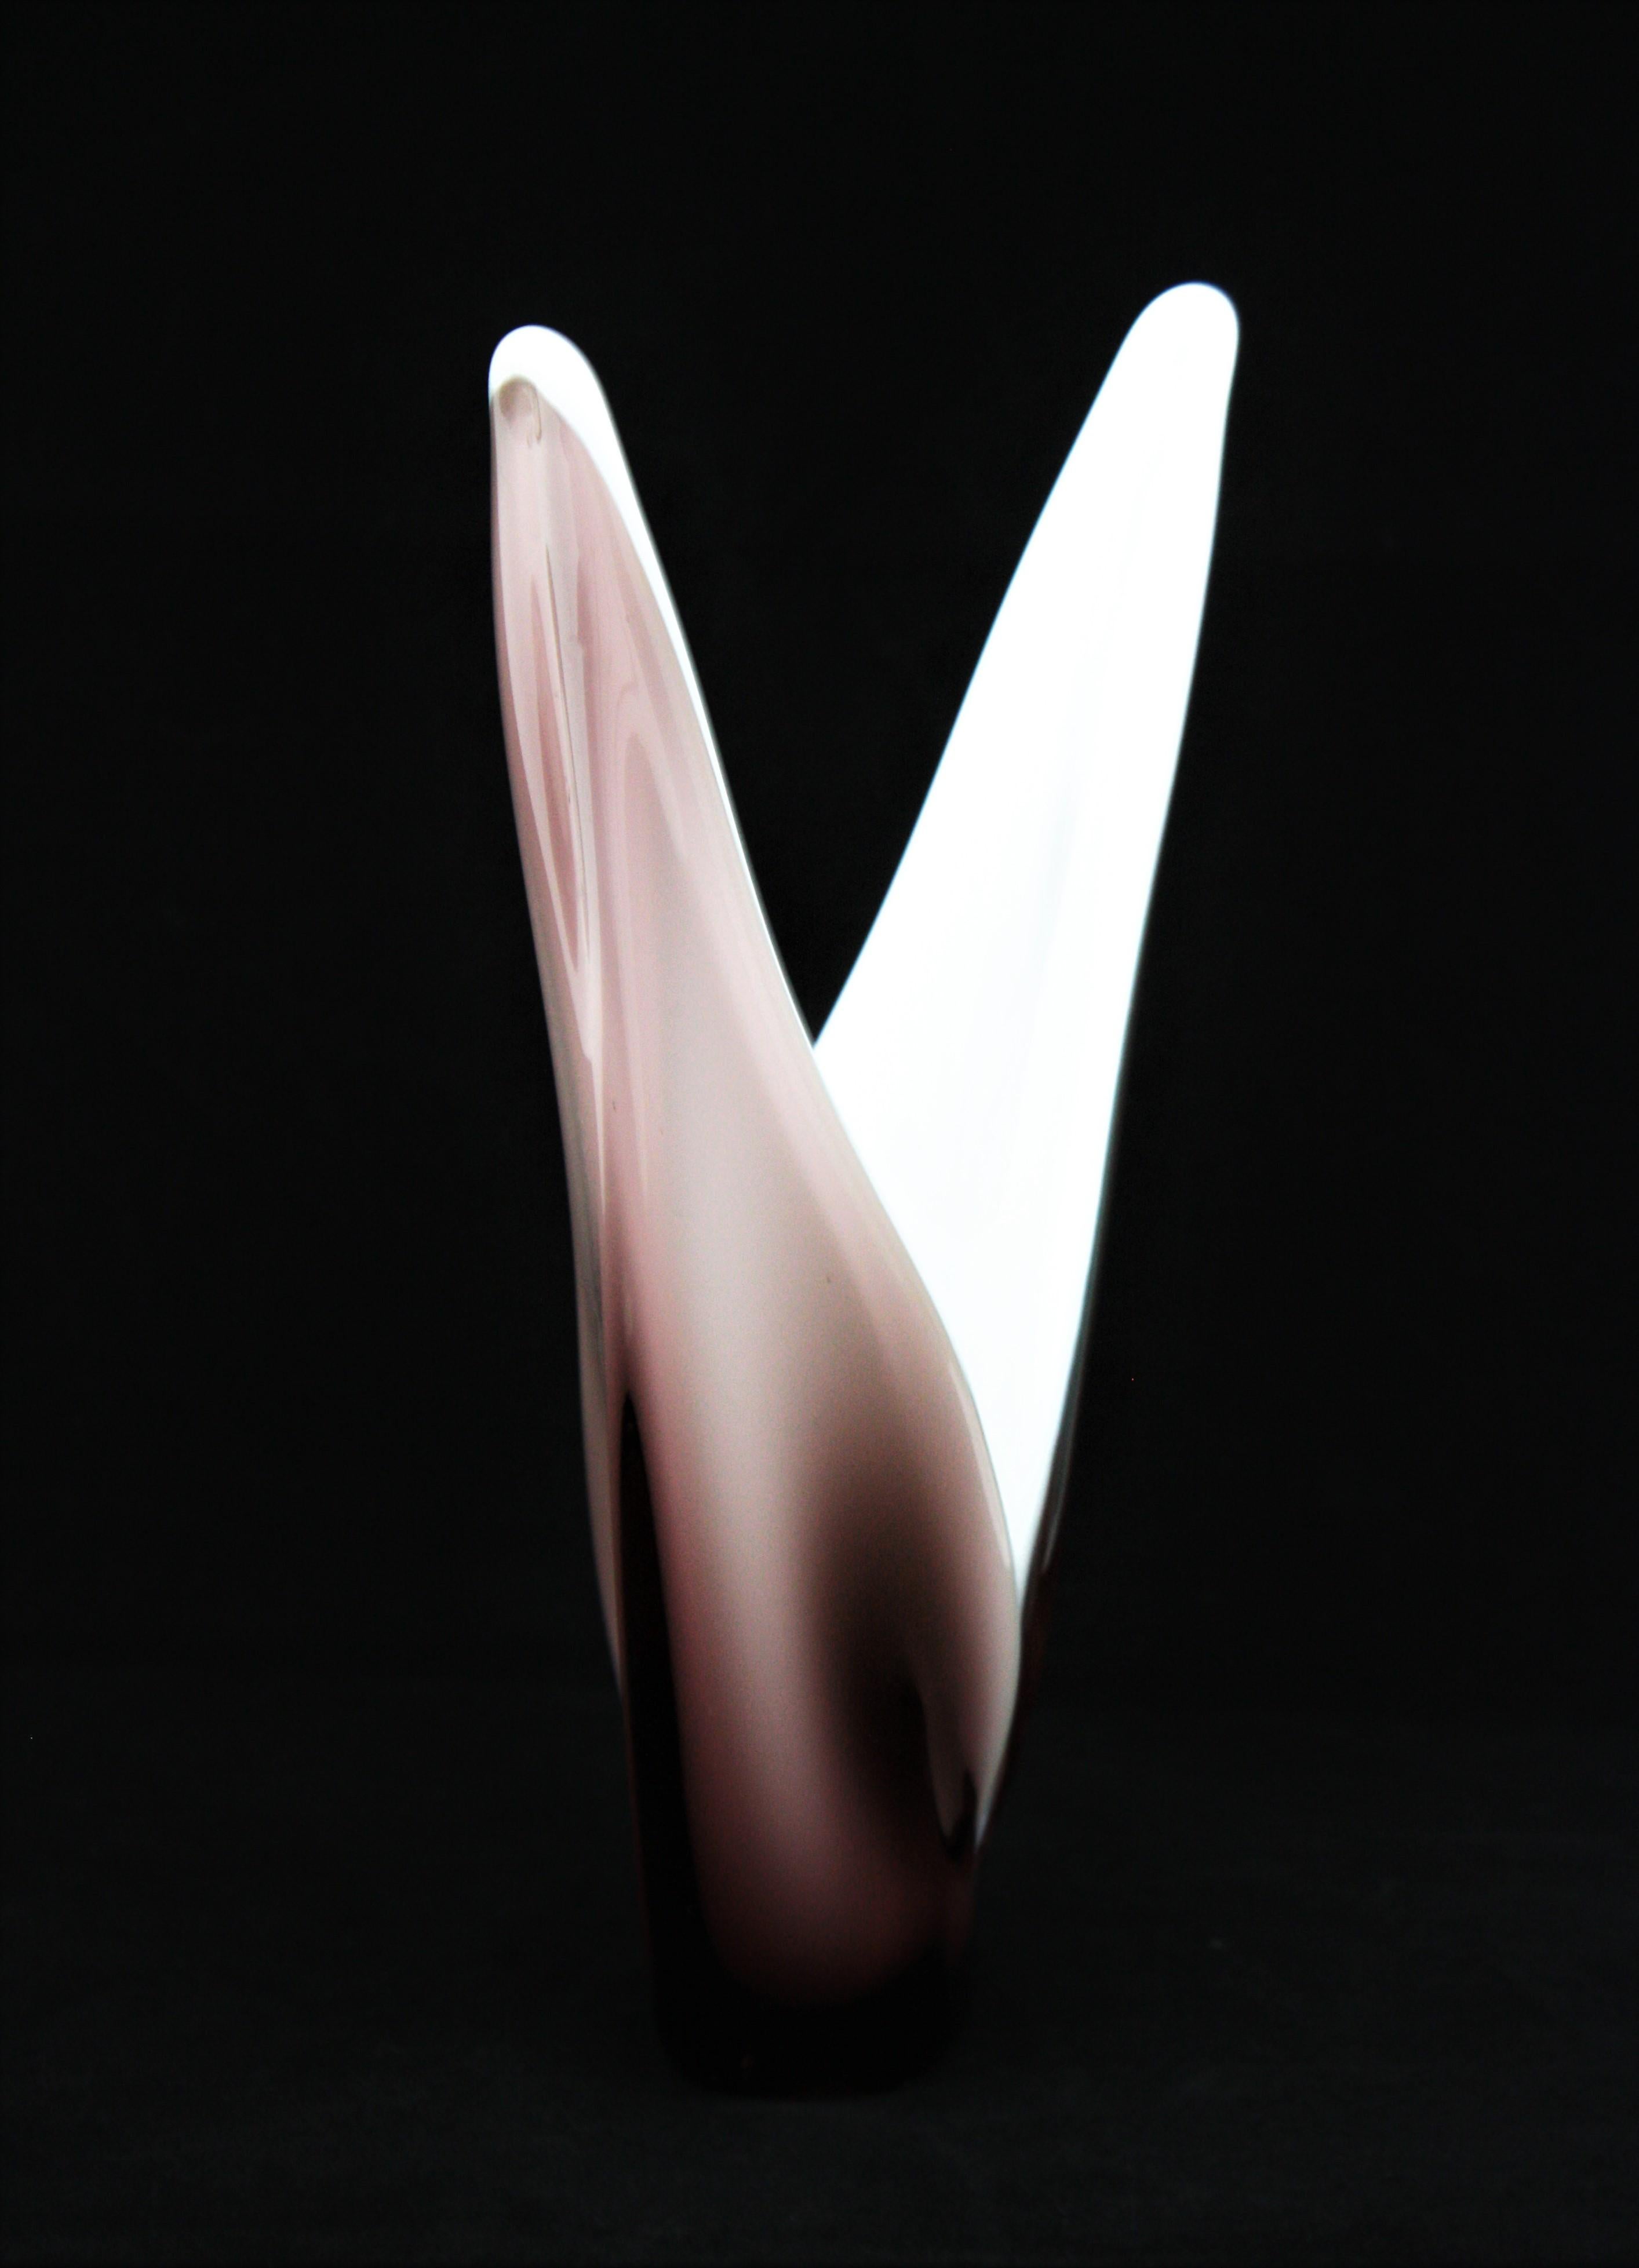 Sculptural Murano glass vase or centerpiece in shades of lilac glass and milk white glass, Italy, 1960s.
Using the Sommerso technique the interior part is made in Opaline glass and the exterior part is lilac / purple glass, darker on the rims.